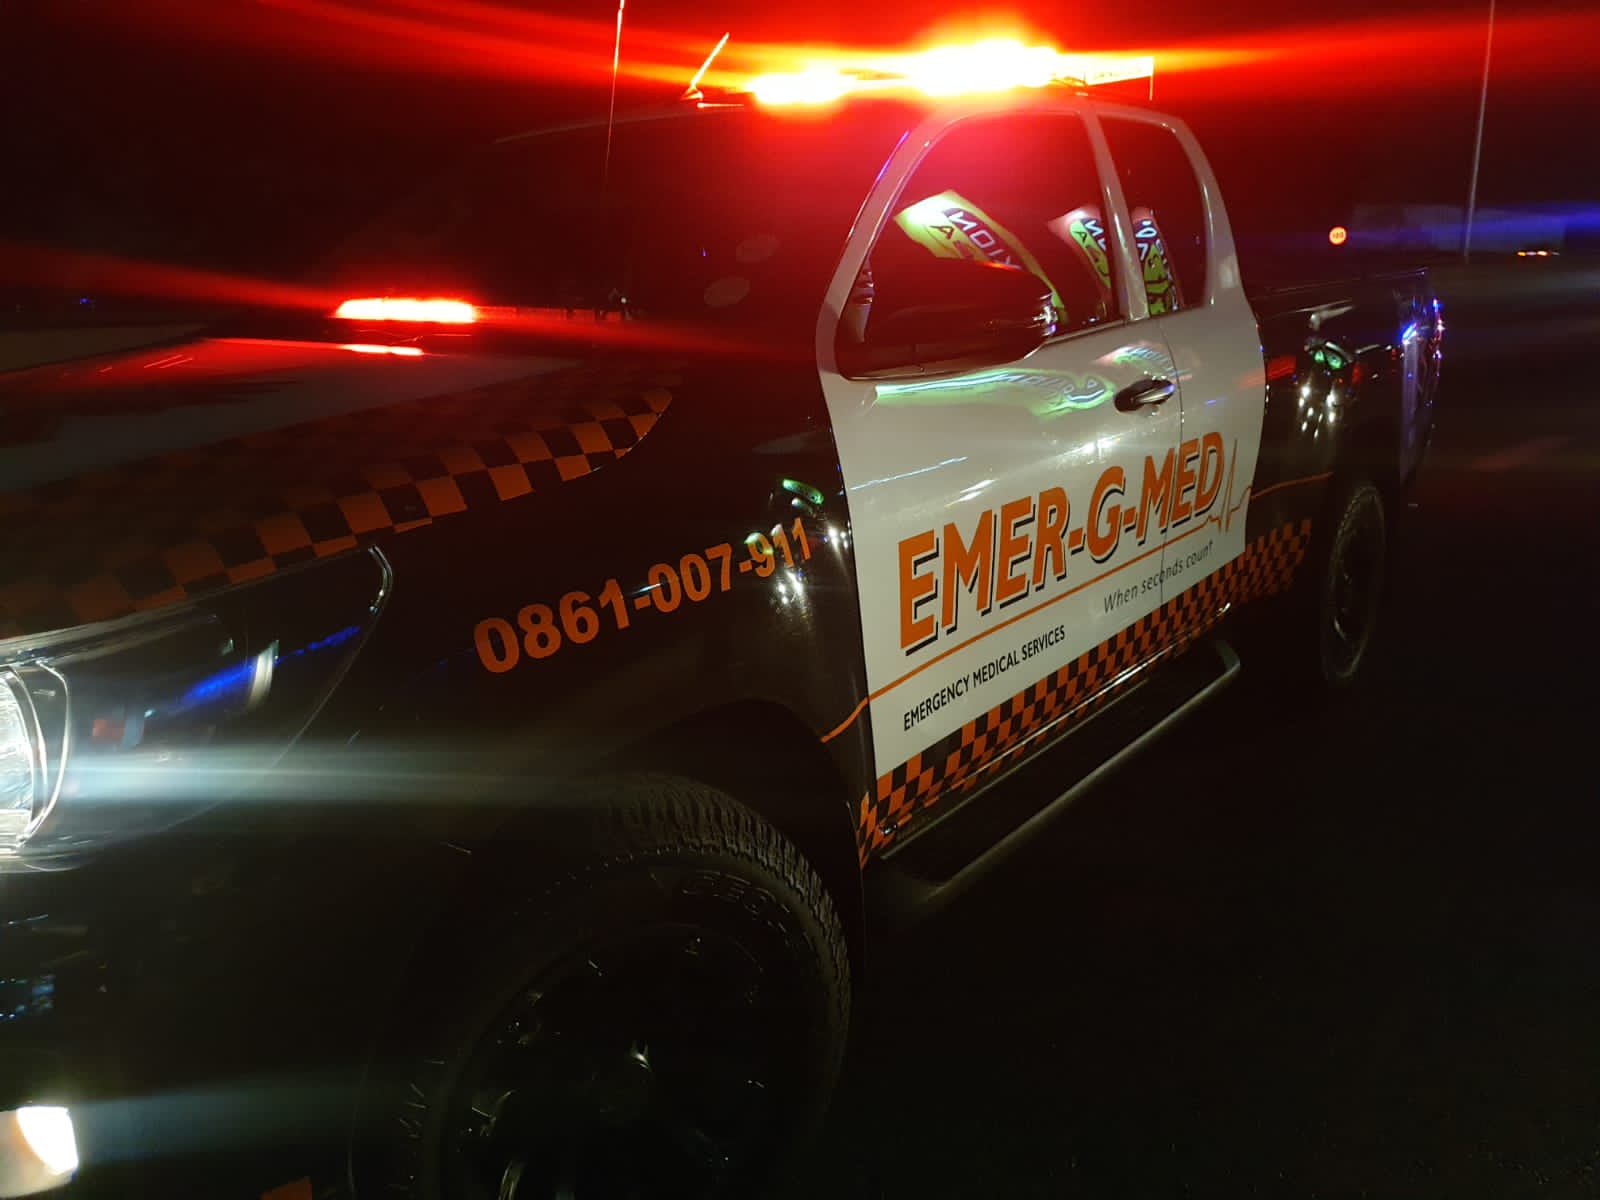 Fortunate escape from injury in a single vehicle rollover in Sandton